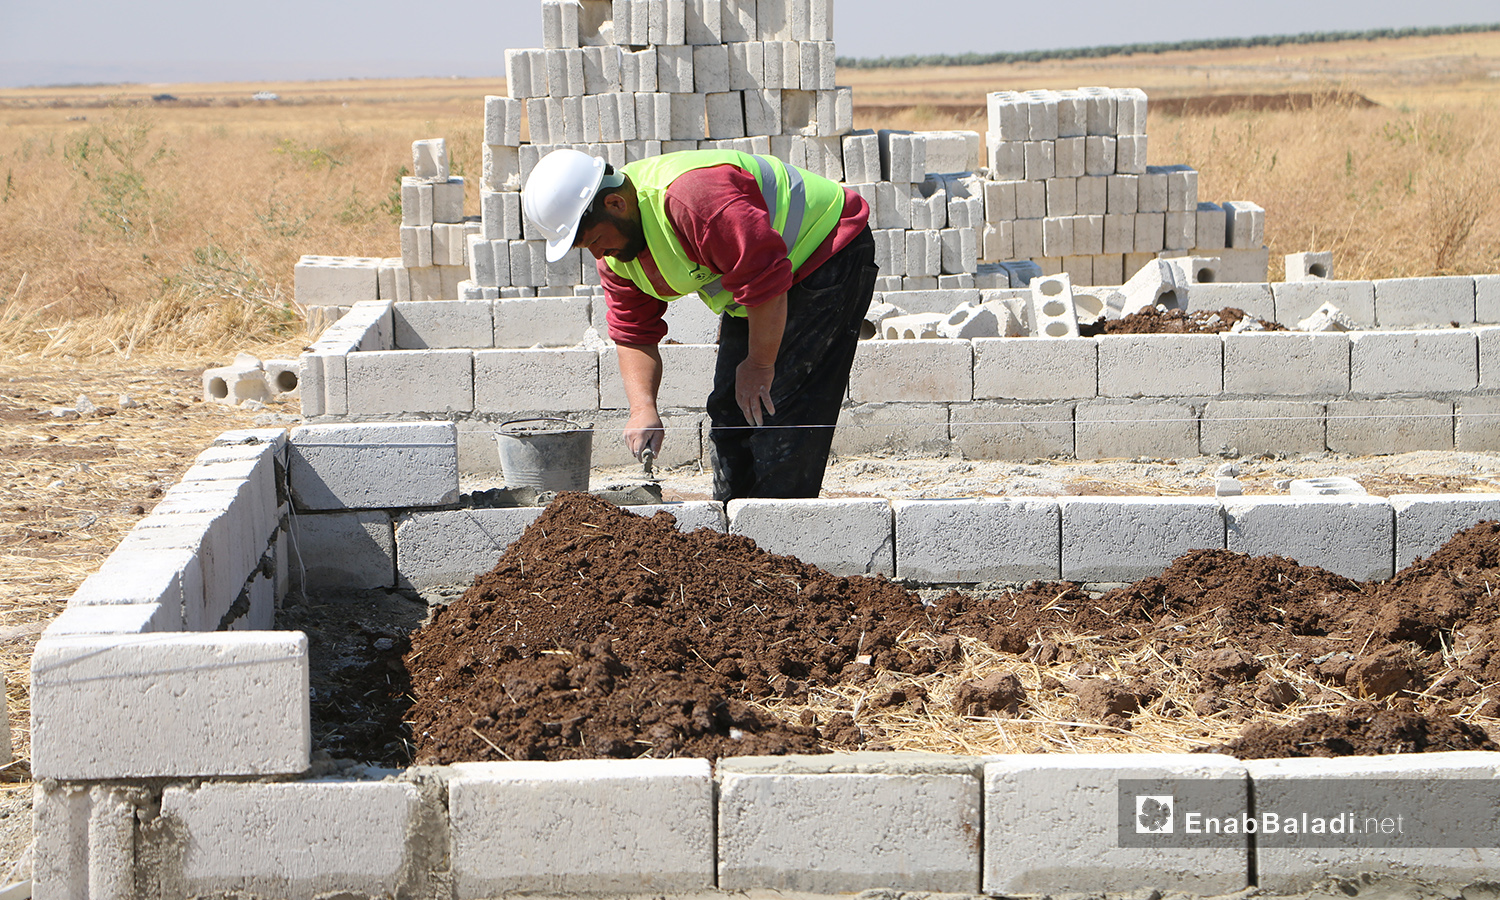 
The project of establishing concrete housing units to replace the makeshift tents in Bahorta village of northern Aleppo countryside – 26 June 2020 (Enab Baladi / Abdul Salam Majan)
